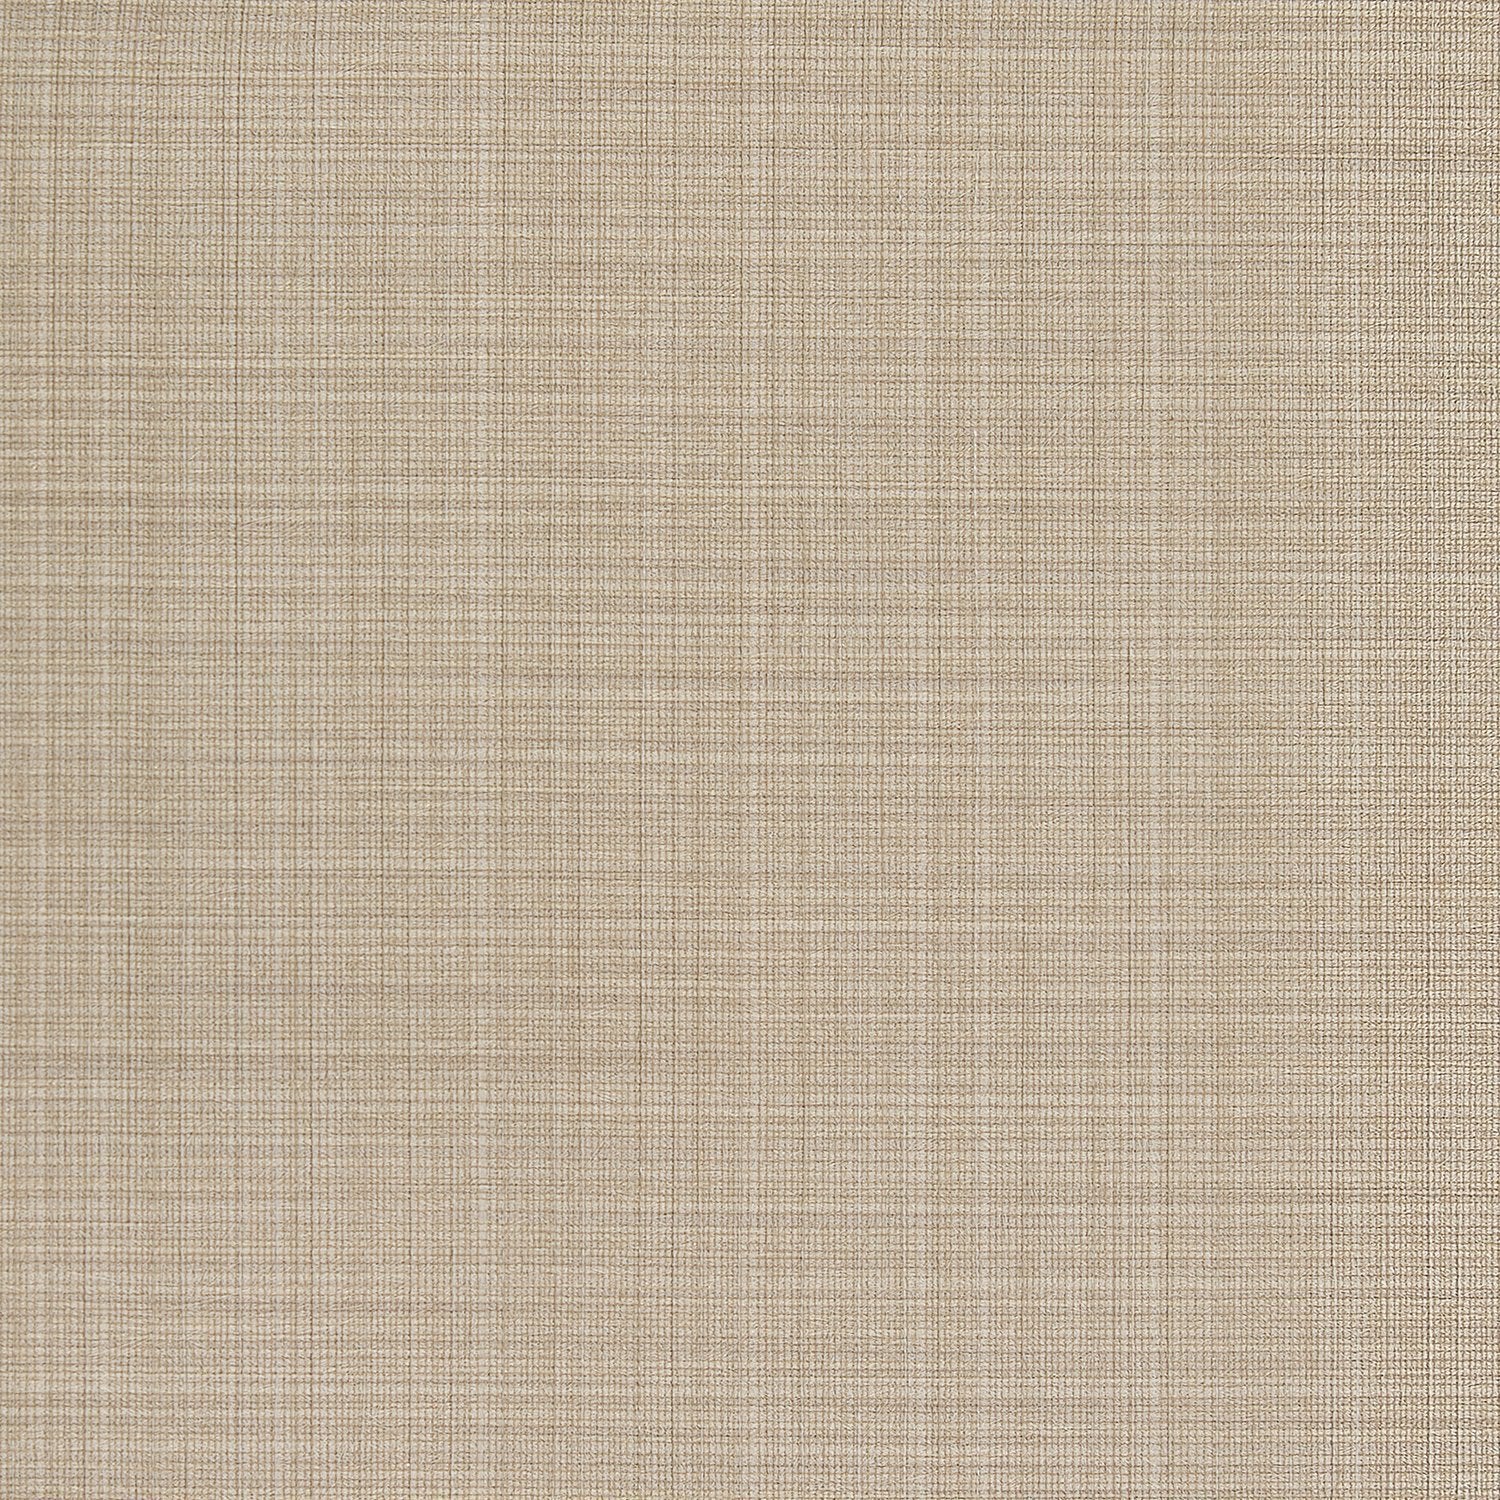 Angles Silk - Y47594 - Wallcovering - Vycon - Kube Contract